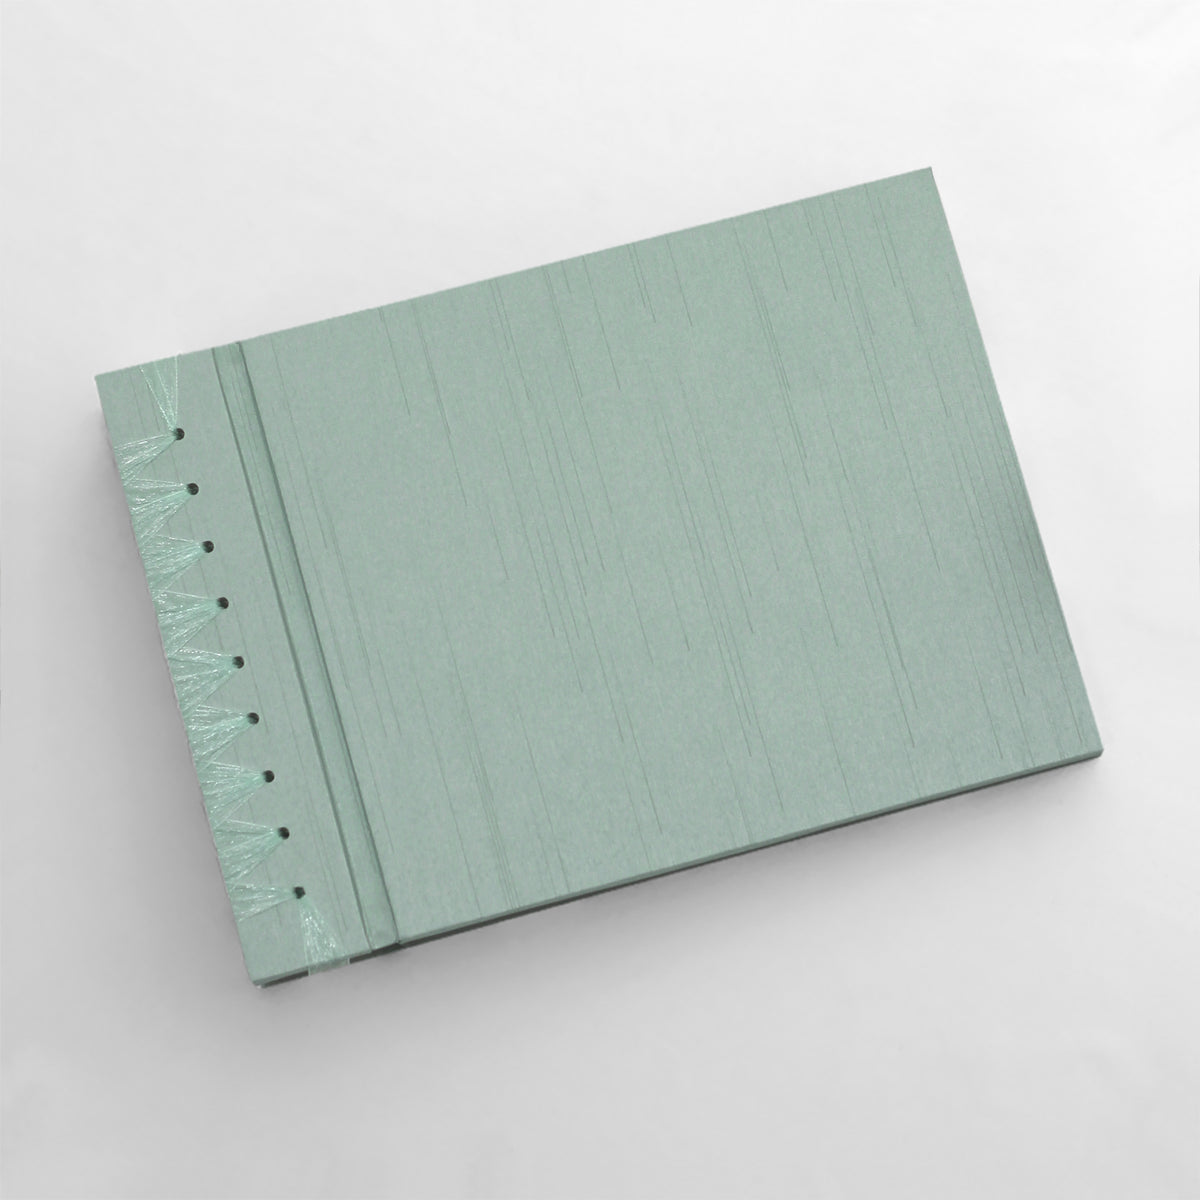 Large 10 x 15 Paper Page Album | Cover: Misty Blue Silk | Available Personalized